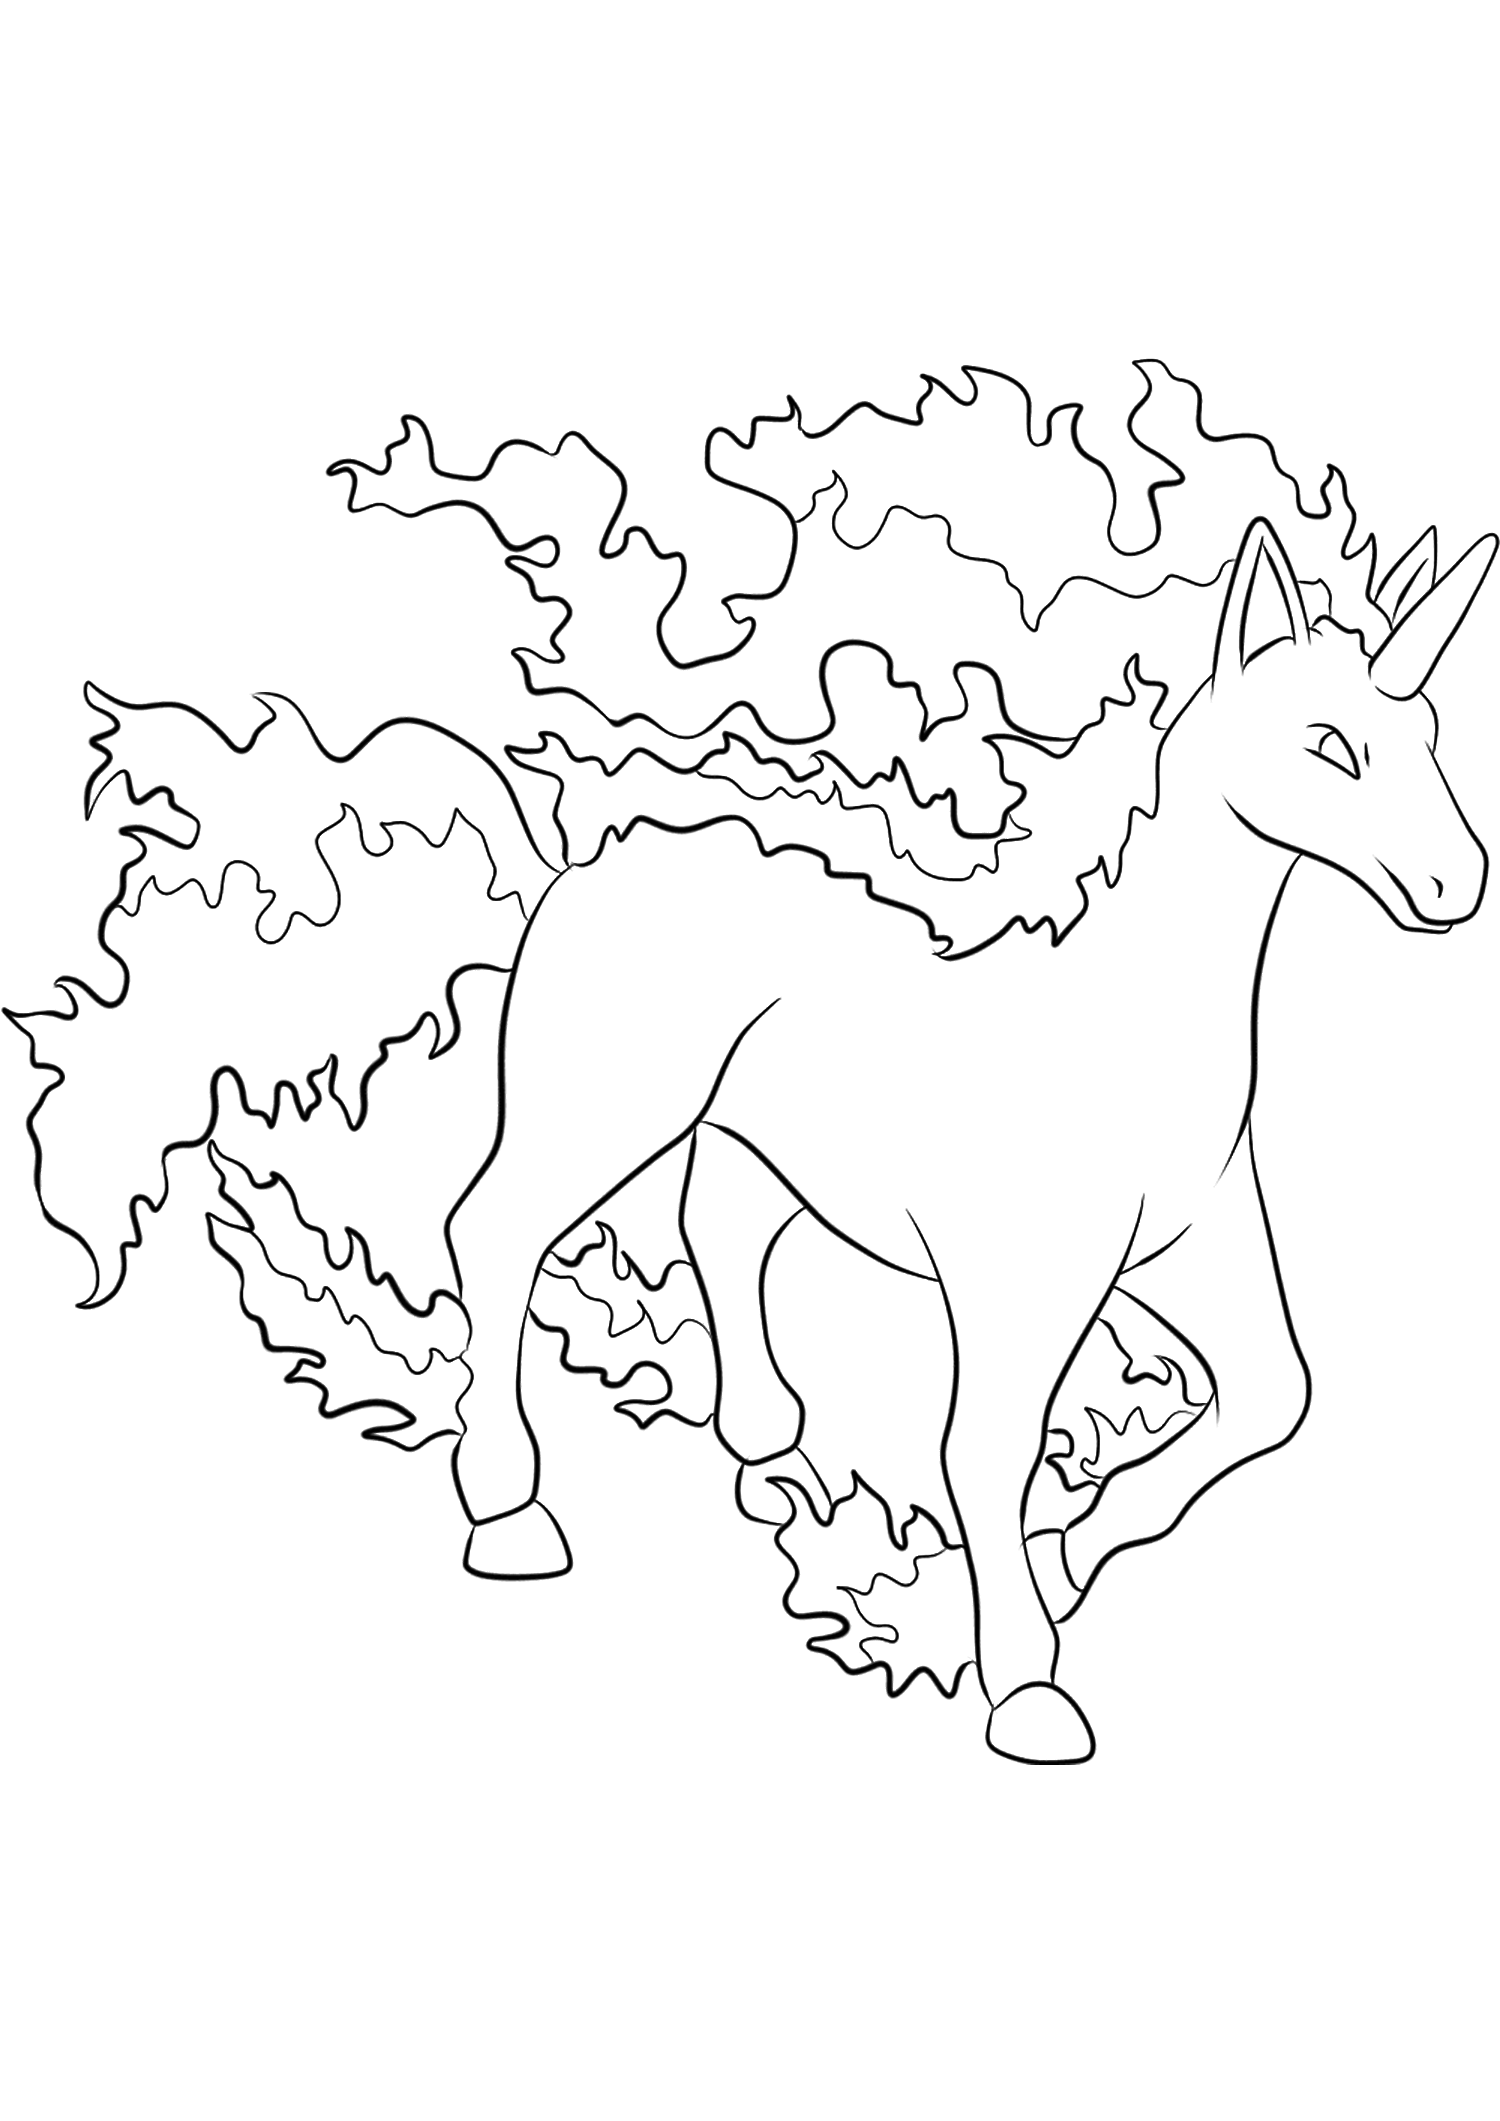 Rapidash (No.78). Rapidash Coloring page, Generation I Pokemon of type FireOriginal image credit: Pokemon linearts by Lilly Gerbil on Deviantart.Permission:  All rights reserved © Pokemon company and Ken Sugimori.